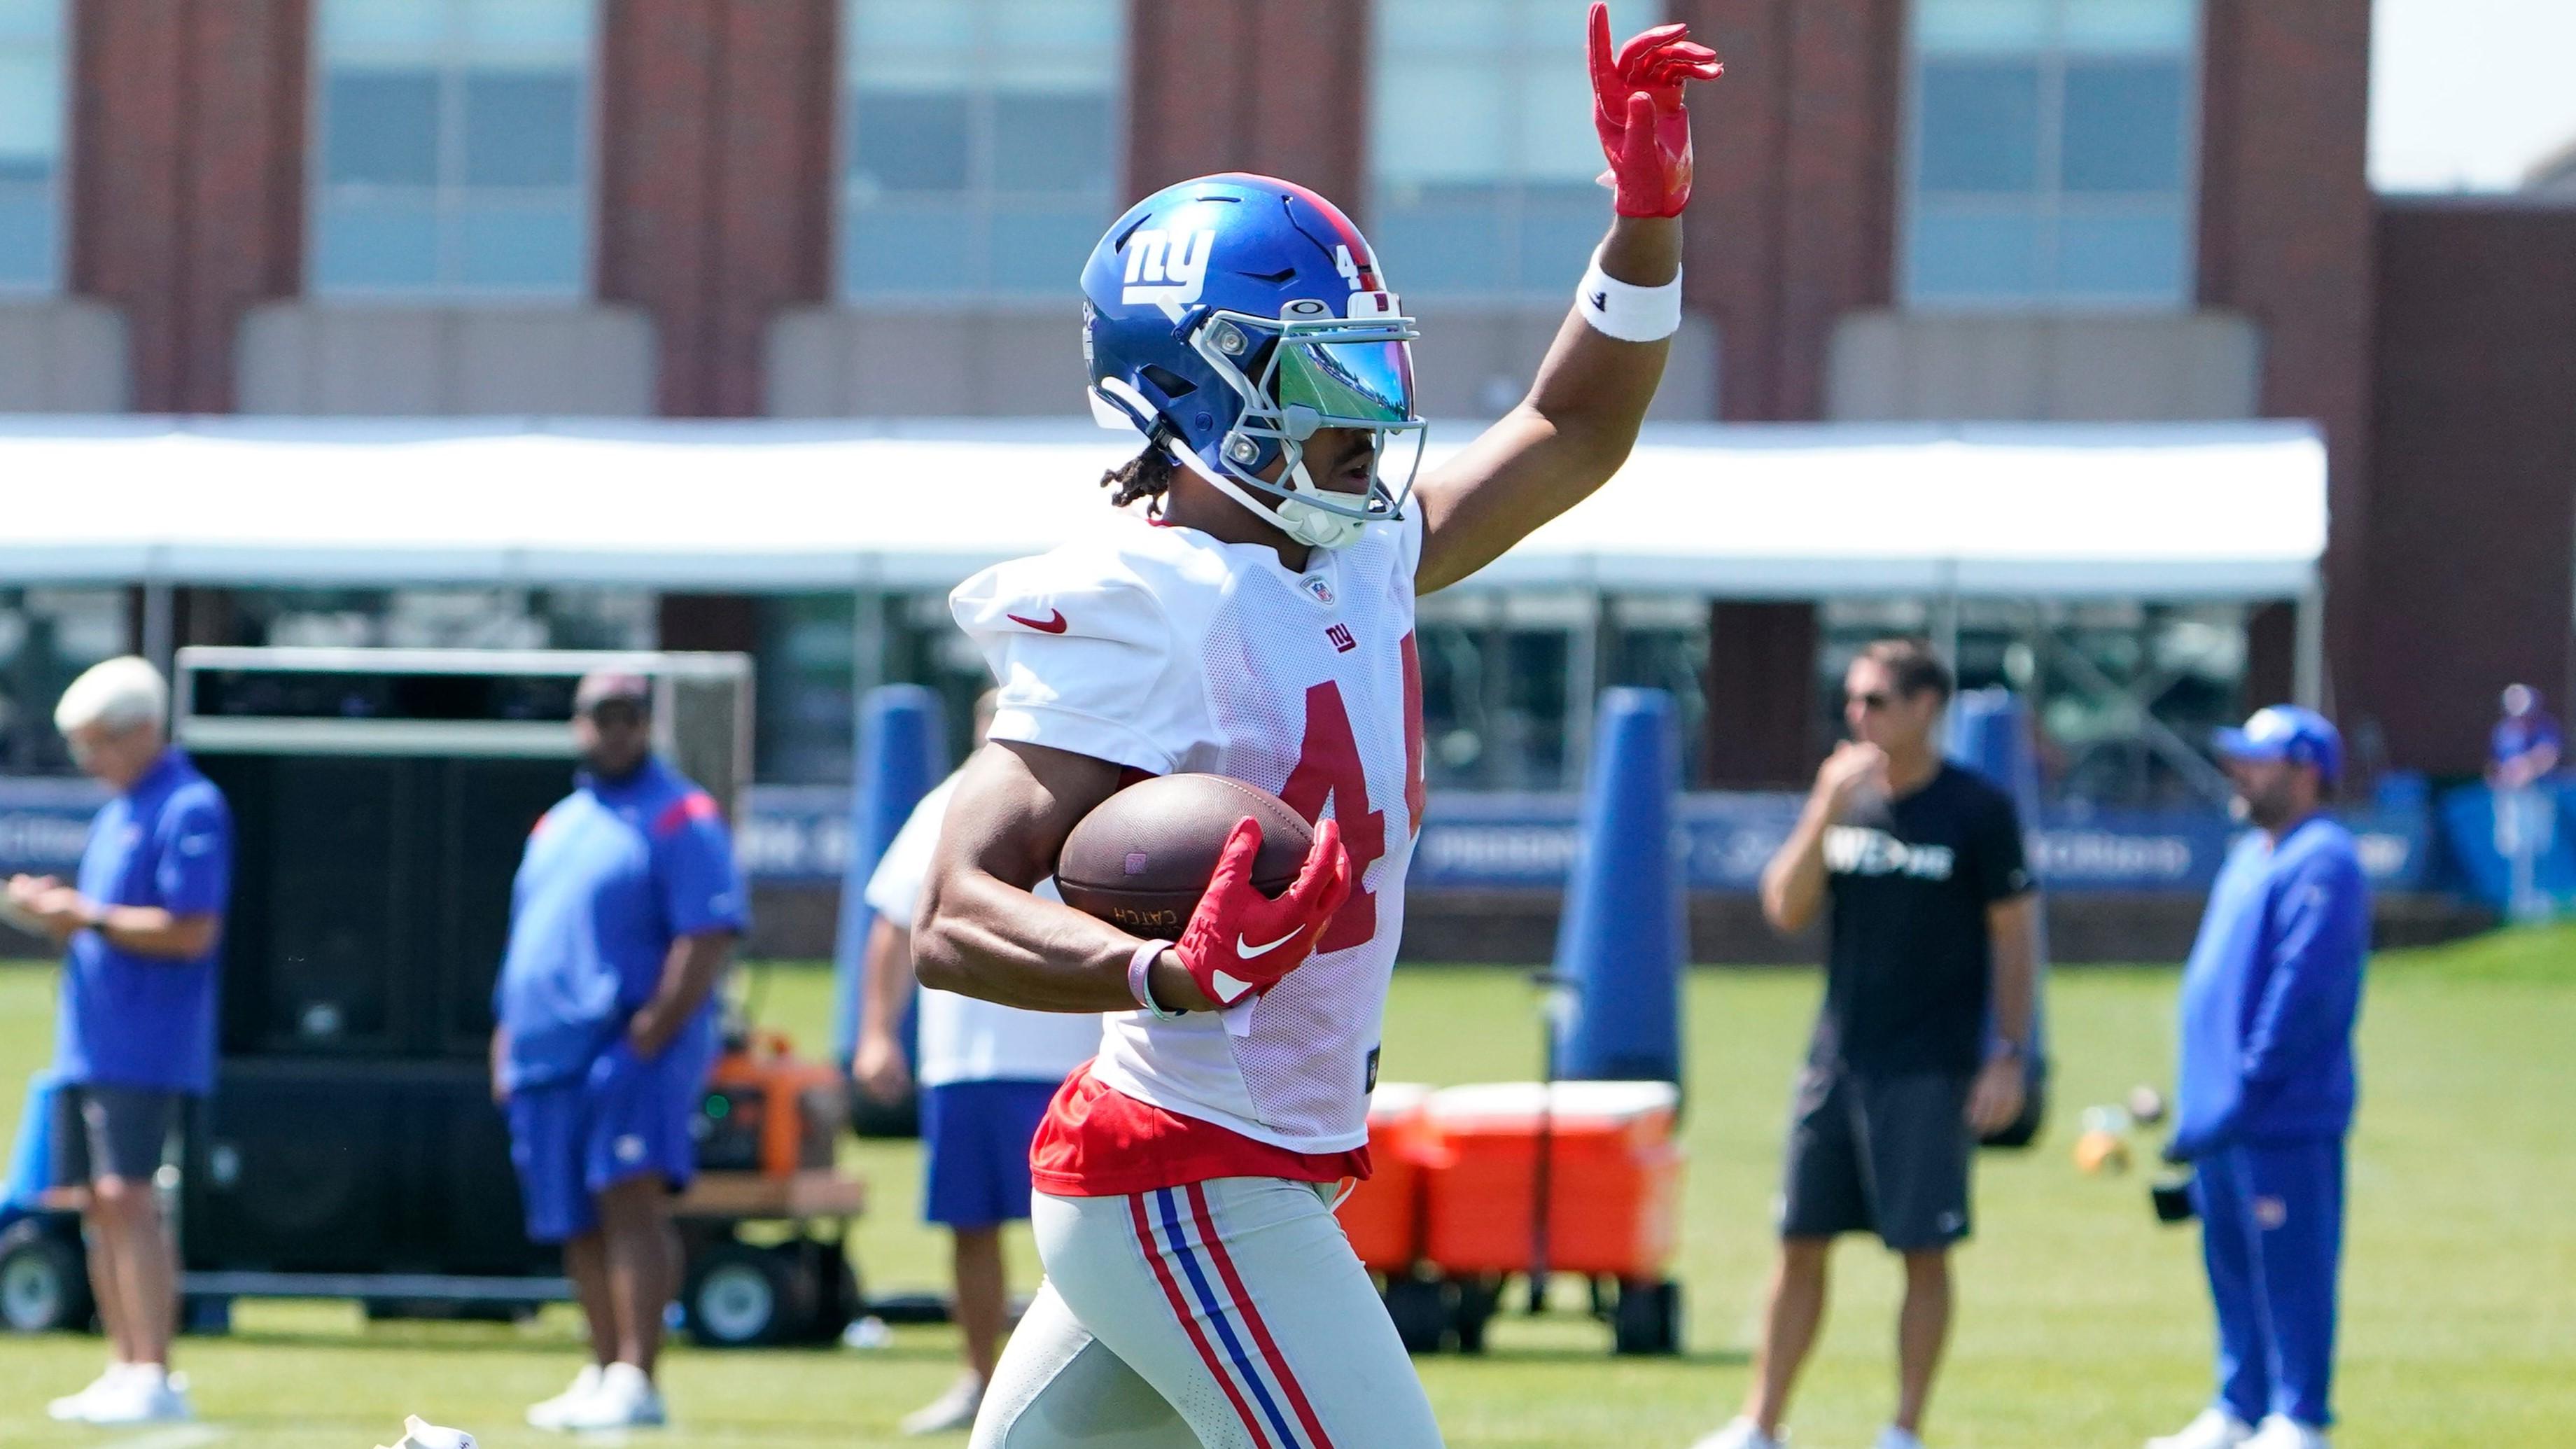 New York Giants cornerback Nick McCloud (44) celebrates a play during training camp in East Rutherford on Monday, July 31, 2023.